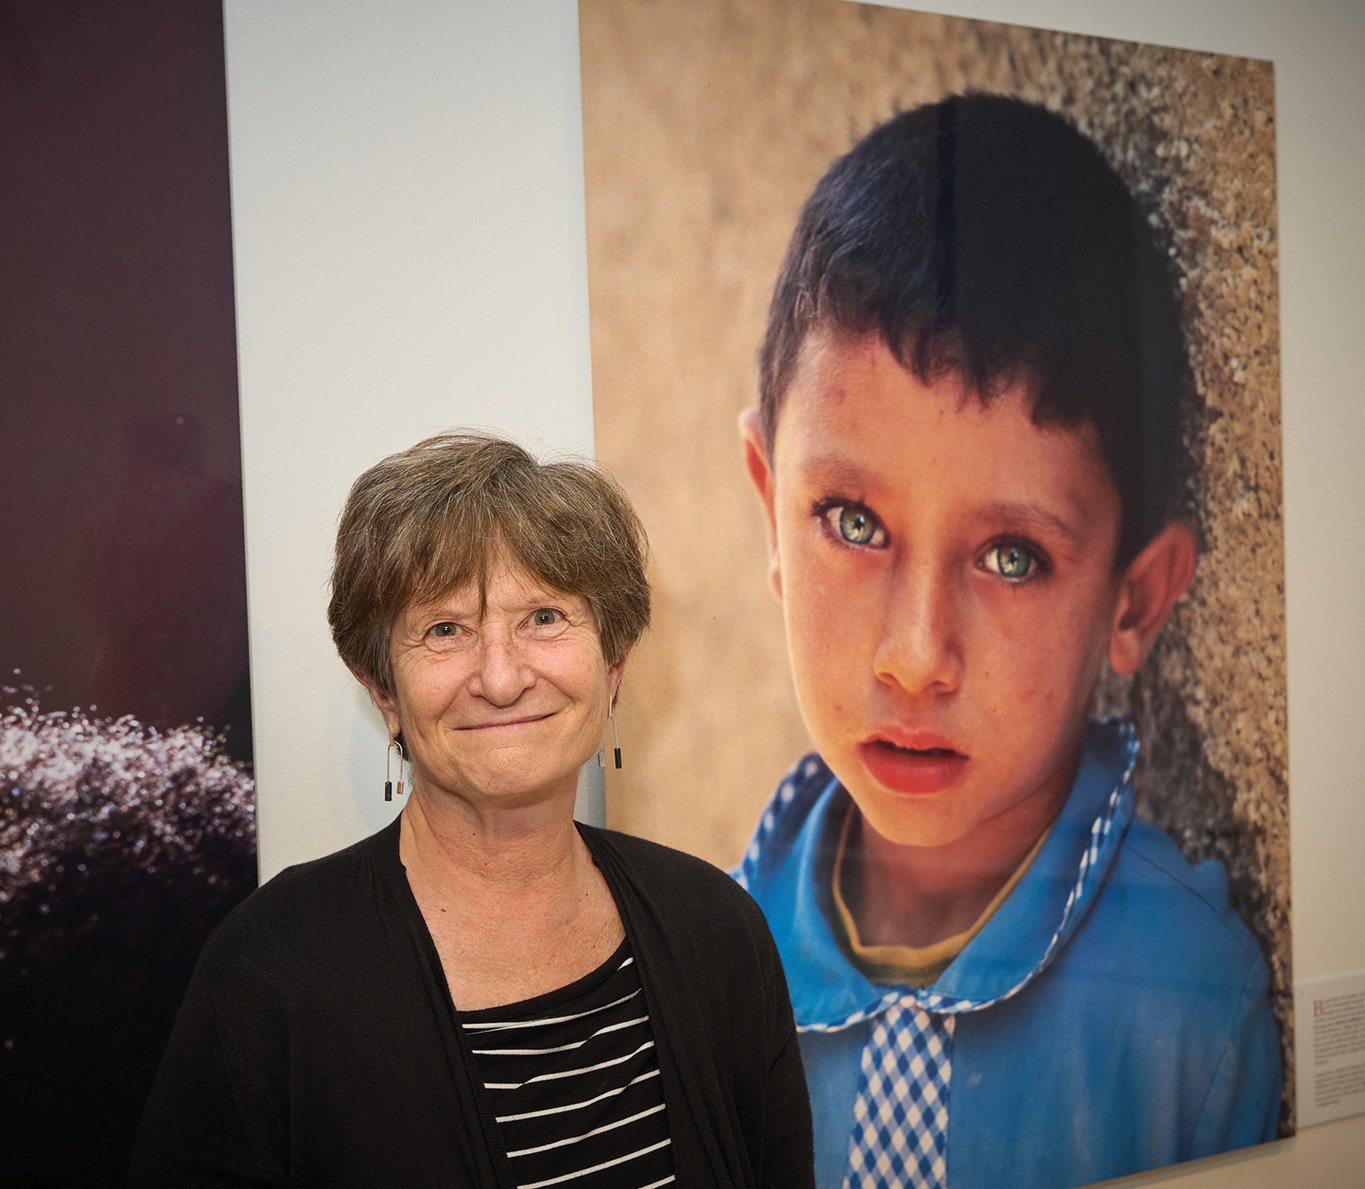 Photographer Ilene Perlman, who had three photos in the show, stands near an image of a little boy in Smakieh, Jordan, taken by Miriam Sushman.